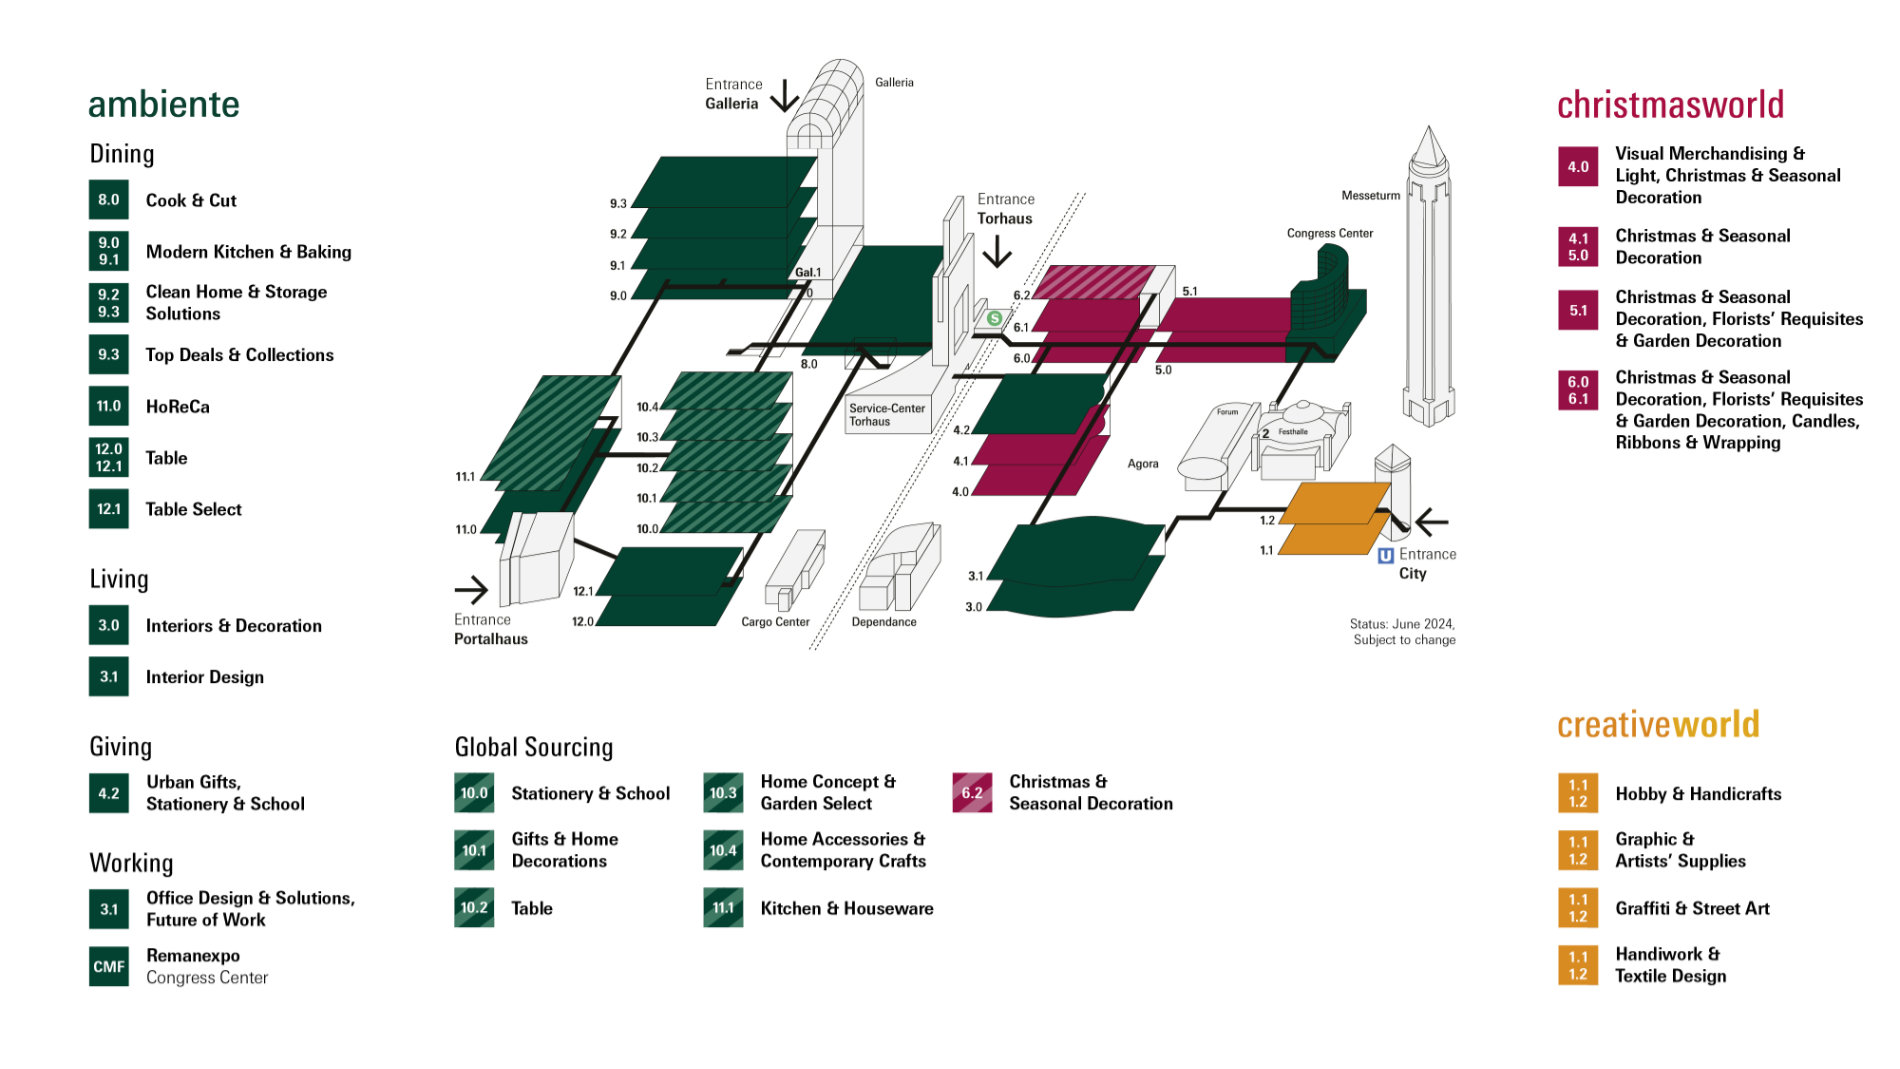 hall plan of the exhibition centre in Frankfurt for Ambiente, Christmasworld and Creativeworld 2025